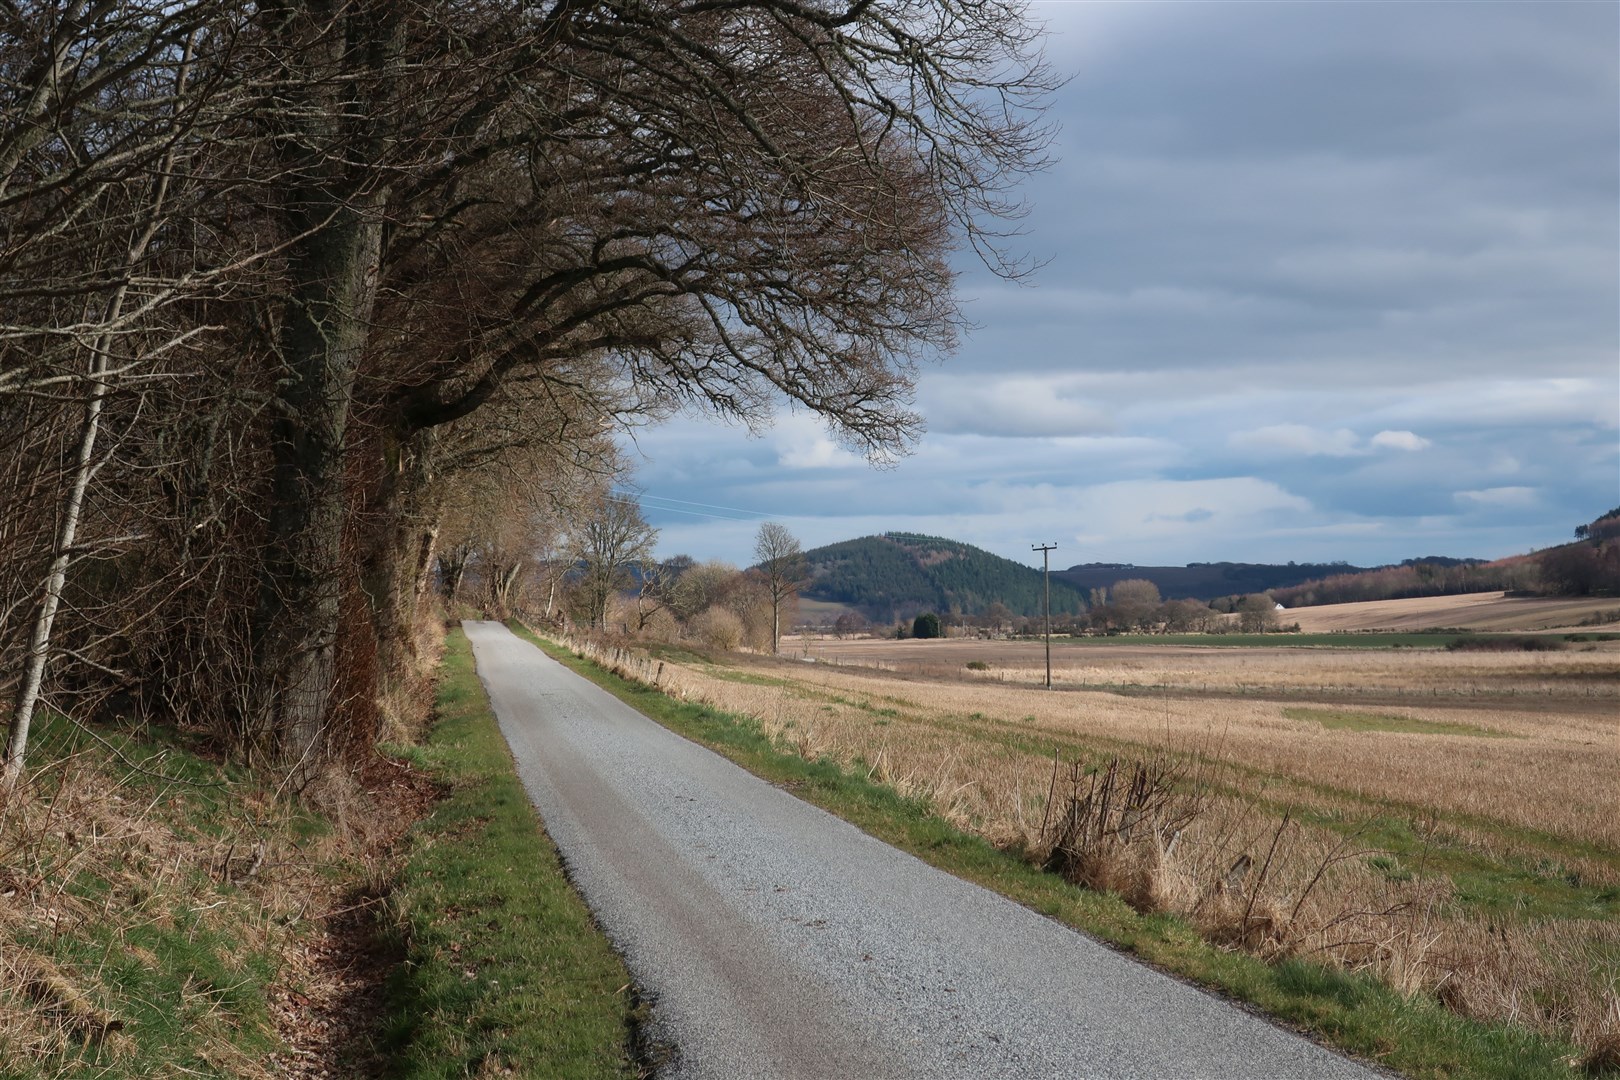 The National Cycle Network uses quiet roads especially in rural areas such as this section of Route 1 on the Black Isle.